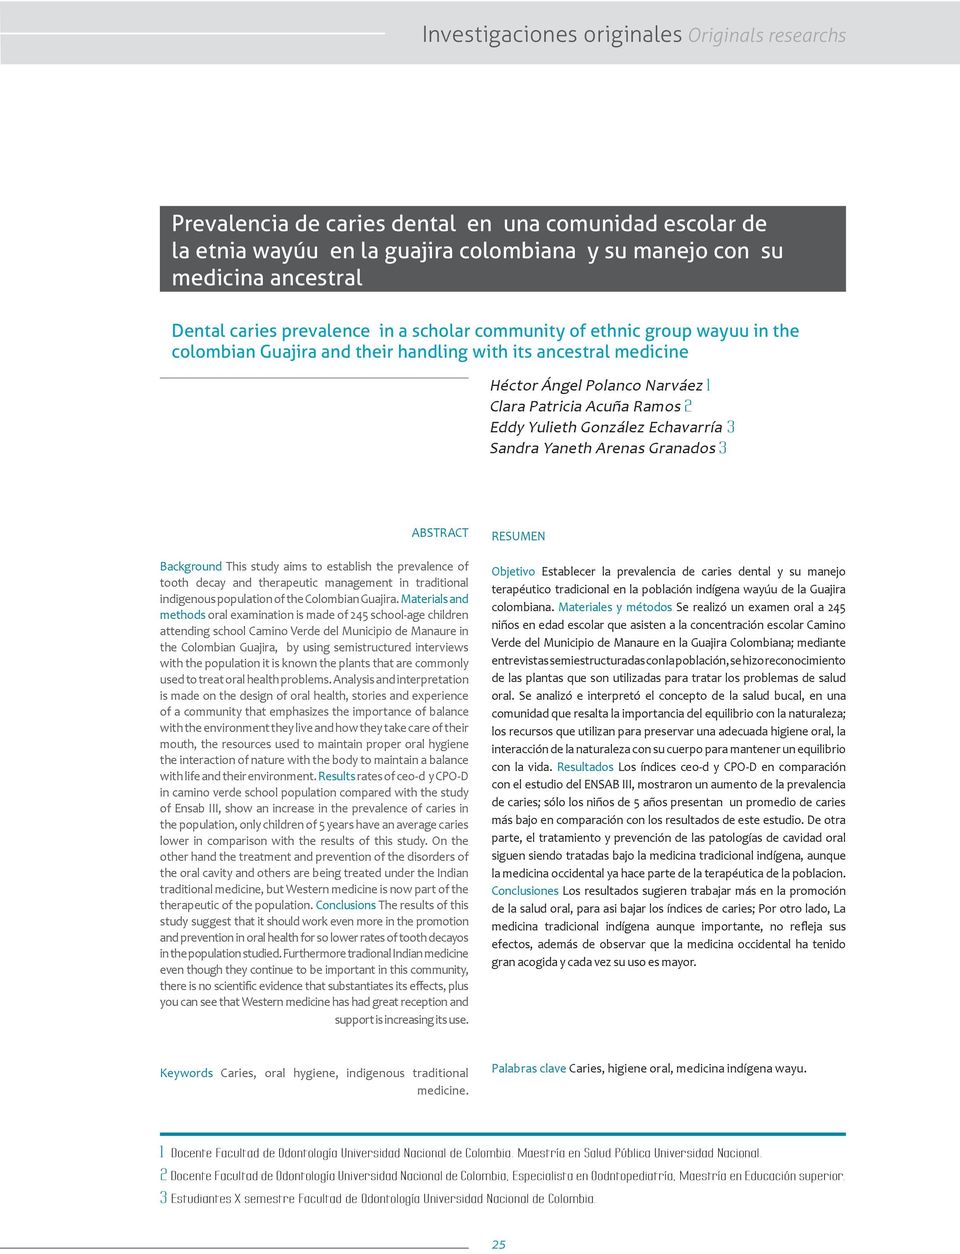 Yulieth González Echavarría 3 Sandra Yaneth Arenas Granados 3 ABSTRACT Background This study aims to establish the prevalence of tooth decay and therapeutic management in traditional indigenous